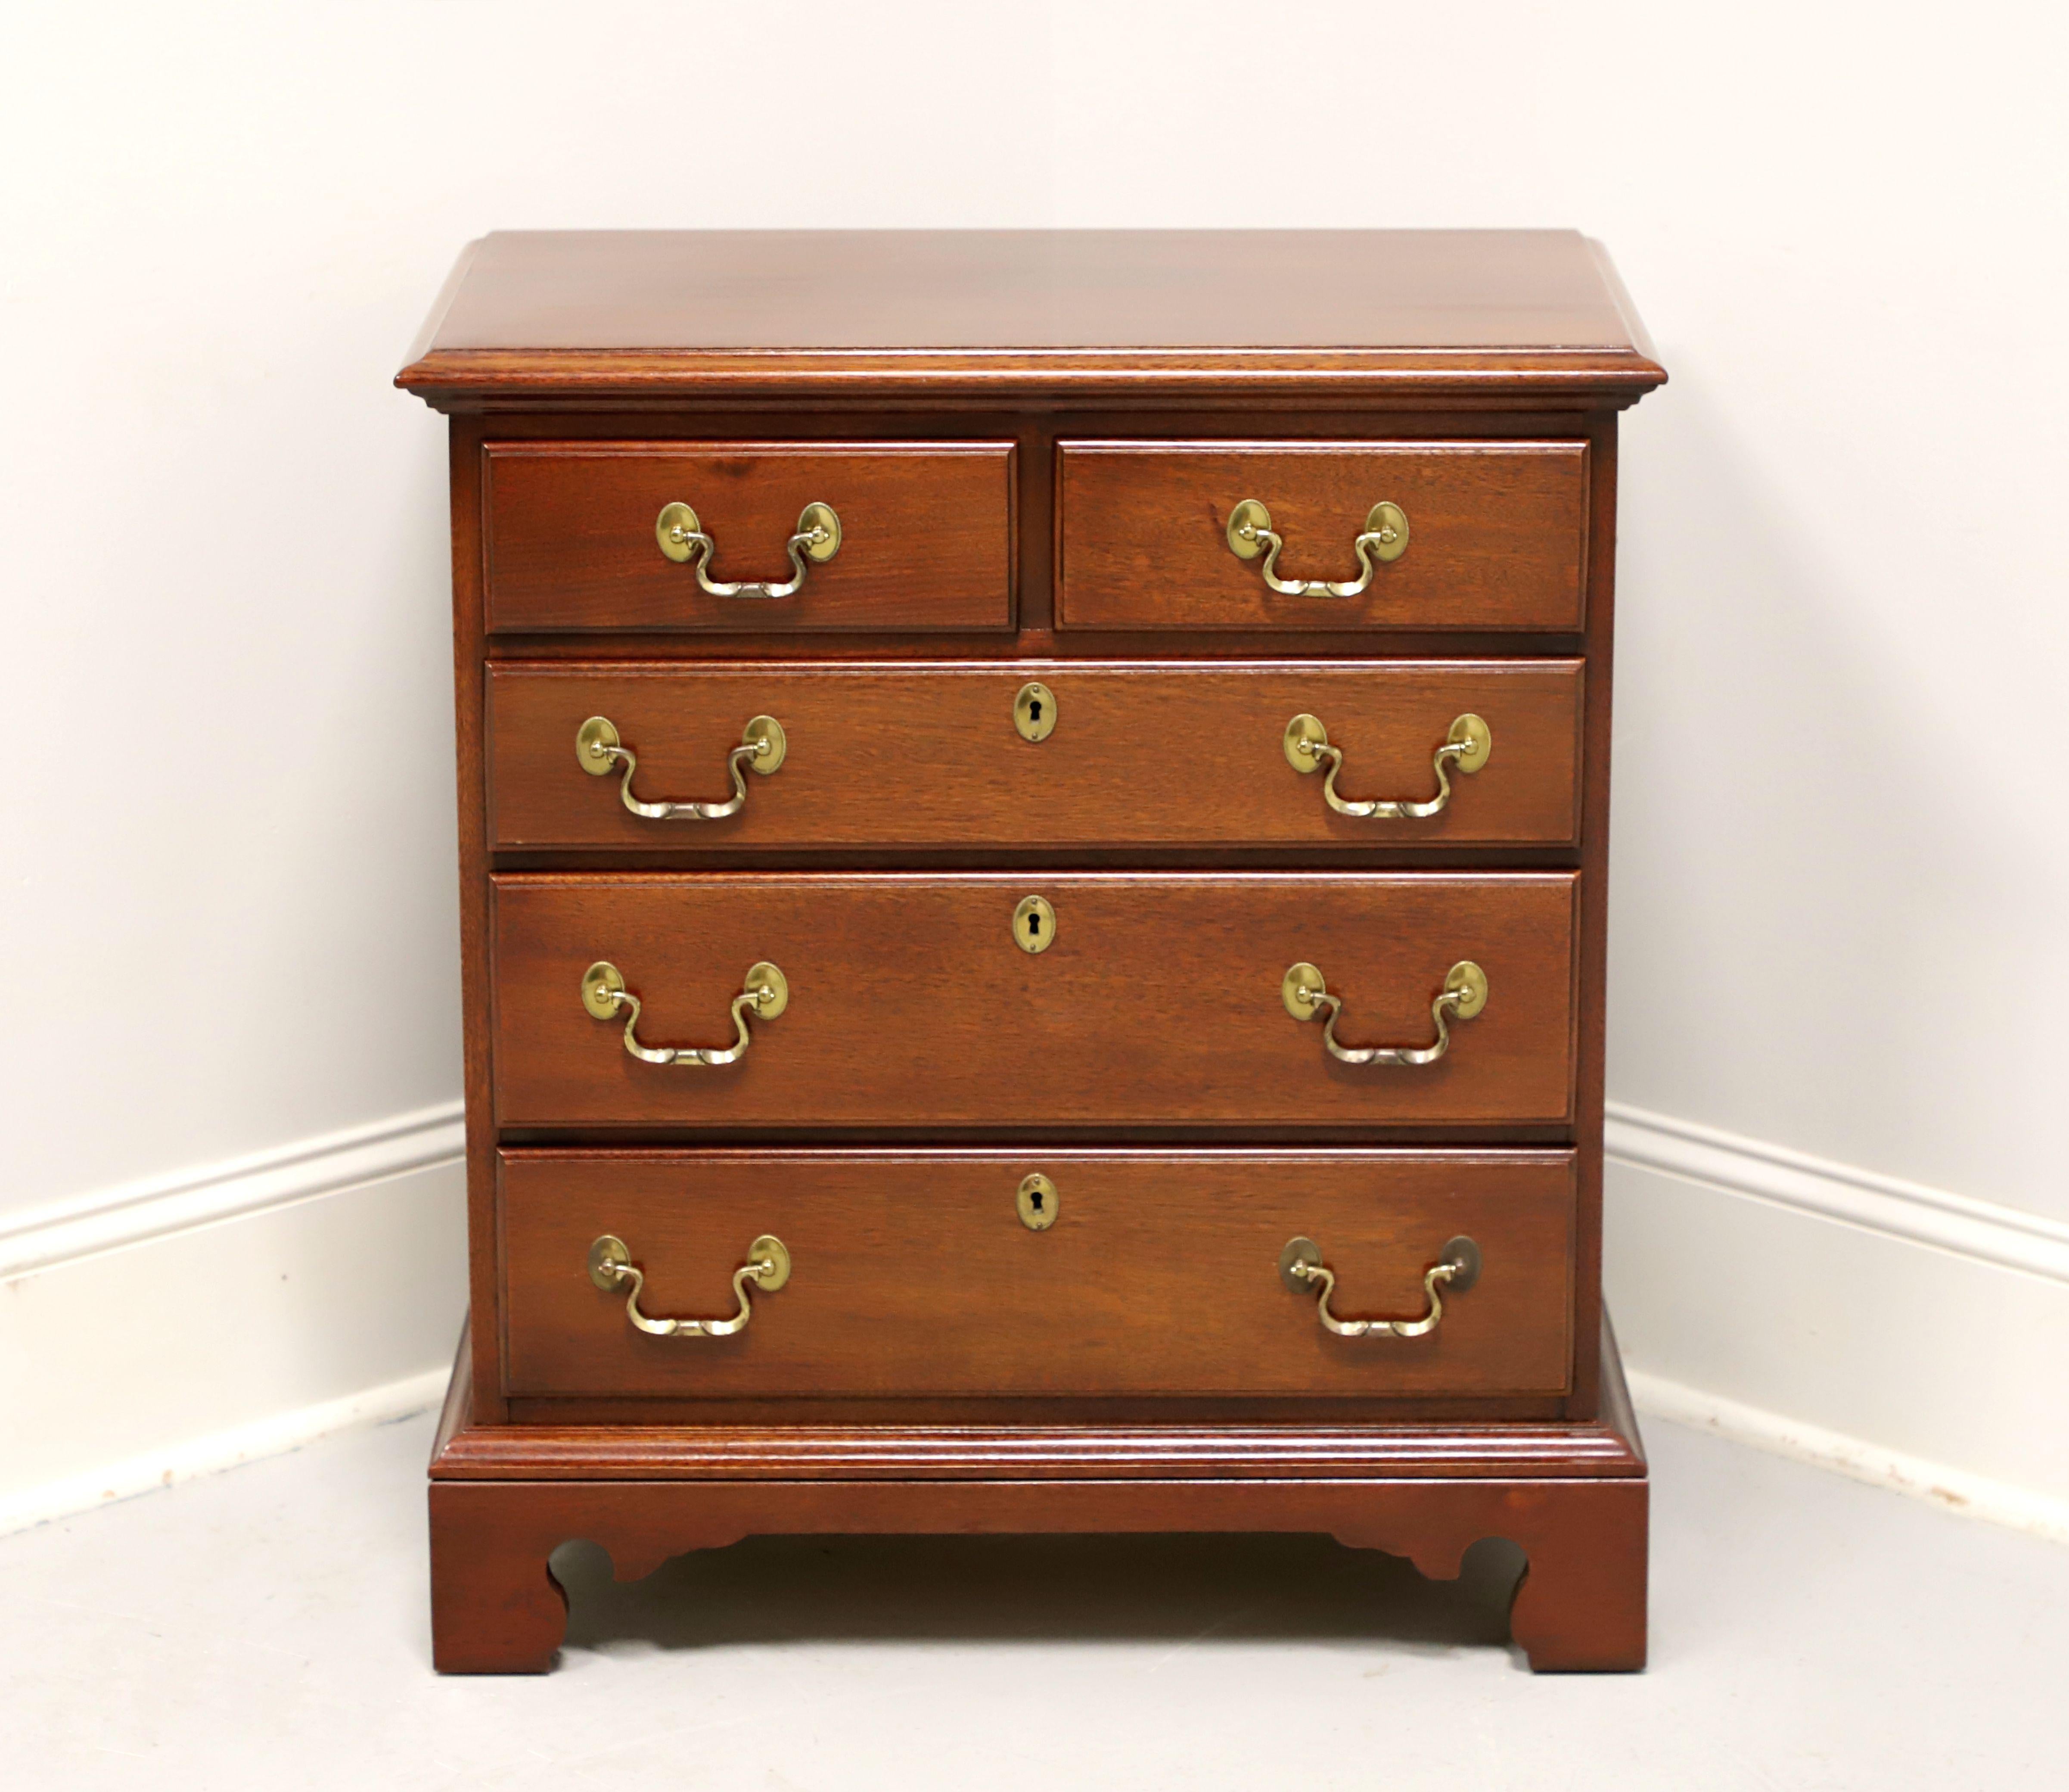 A Chippendale style bedside chest by Link-Taylor, from their Heirloom Gallery, the Planters. Solid mahogany with brass hardware, bevel edge to the top, side handles, and bracket feet. Two over three drawers of dovetail construction, with three lower